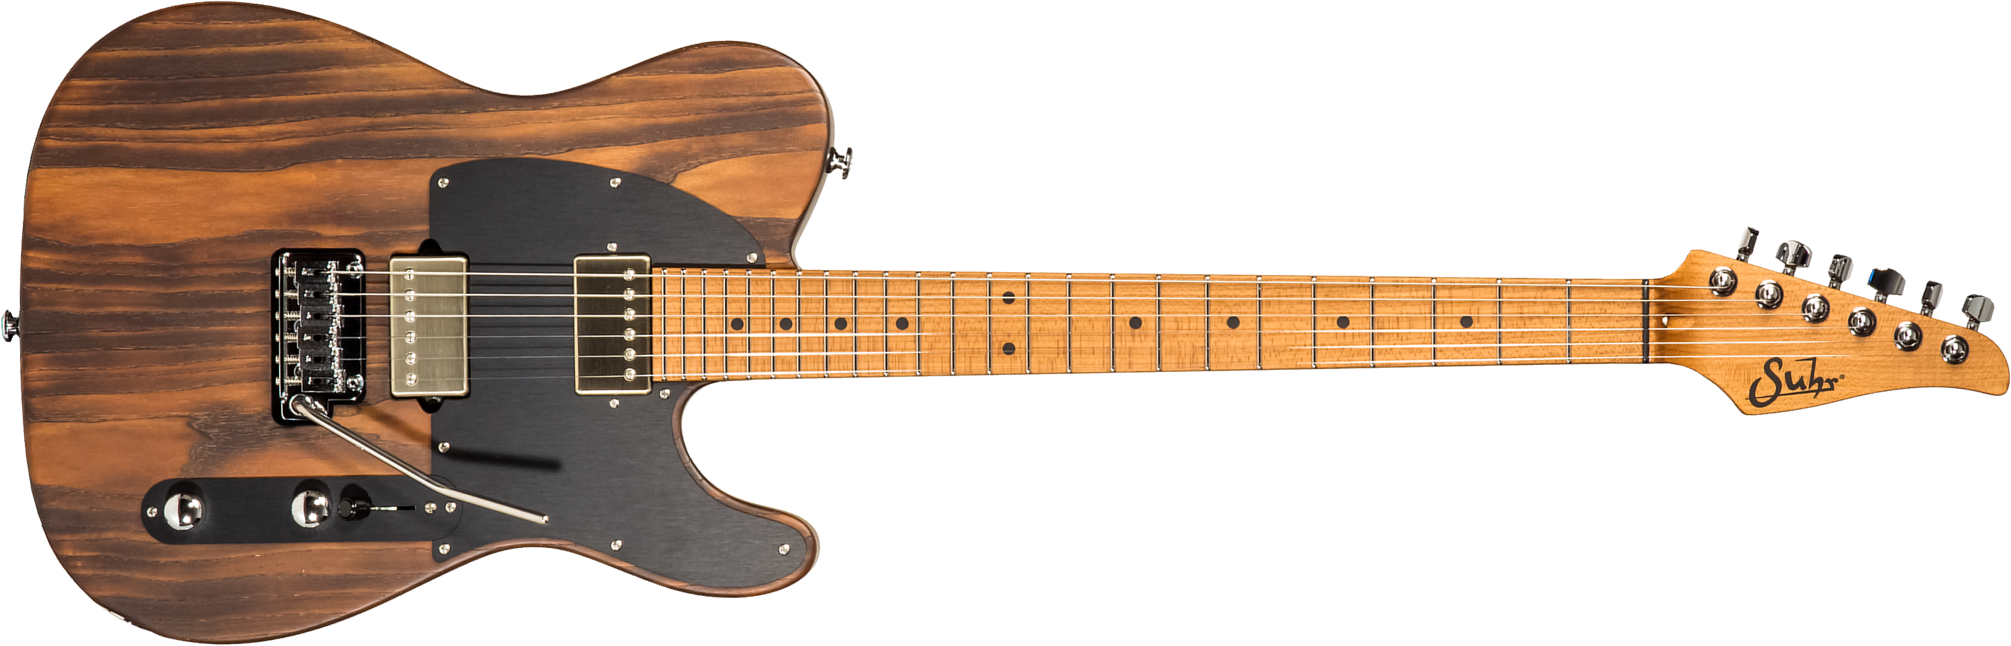 Suhr Andy Wood Modern T 01-sig-0033 Usa Signature 2h Trem Mn #72794 - Whiskey Barrel - Guitare Électrique Forme Tel - Main picture